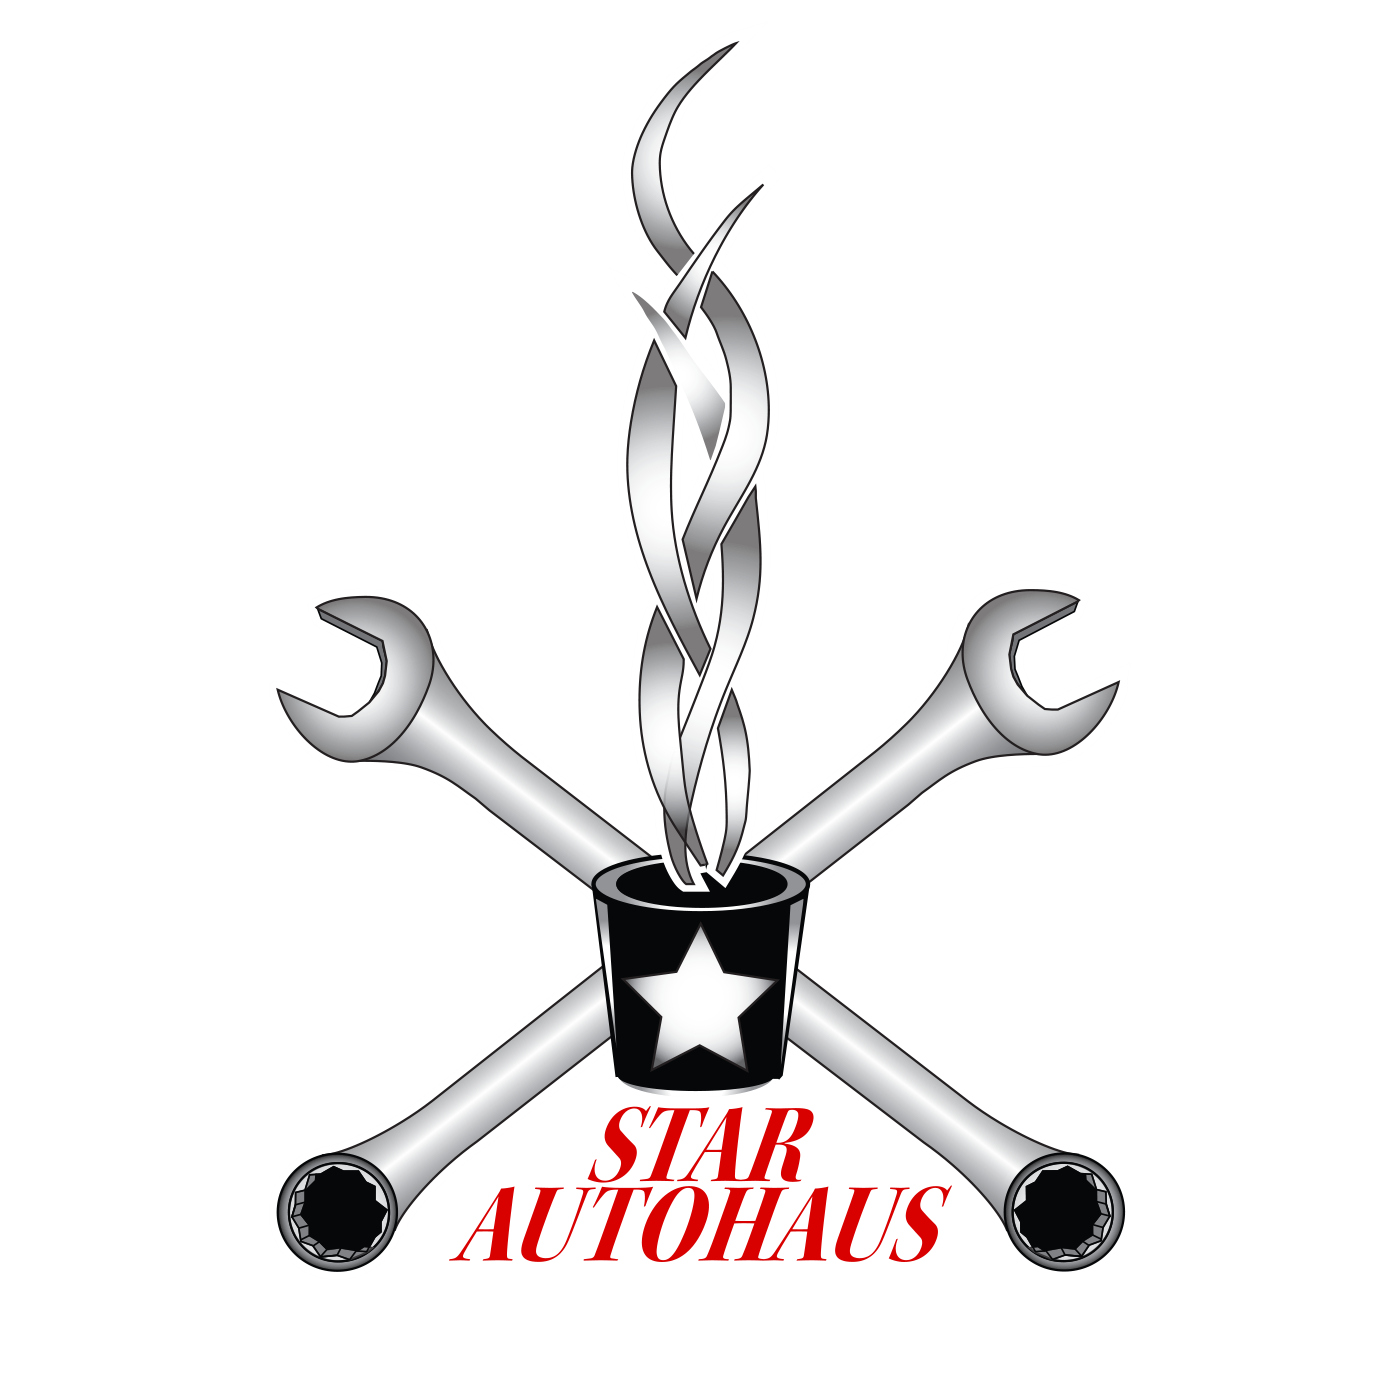 Star Autohaus Logo for Auto Repair Shop in Los Angeles.jpg